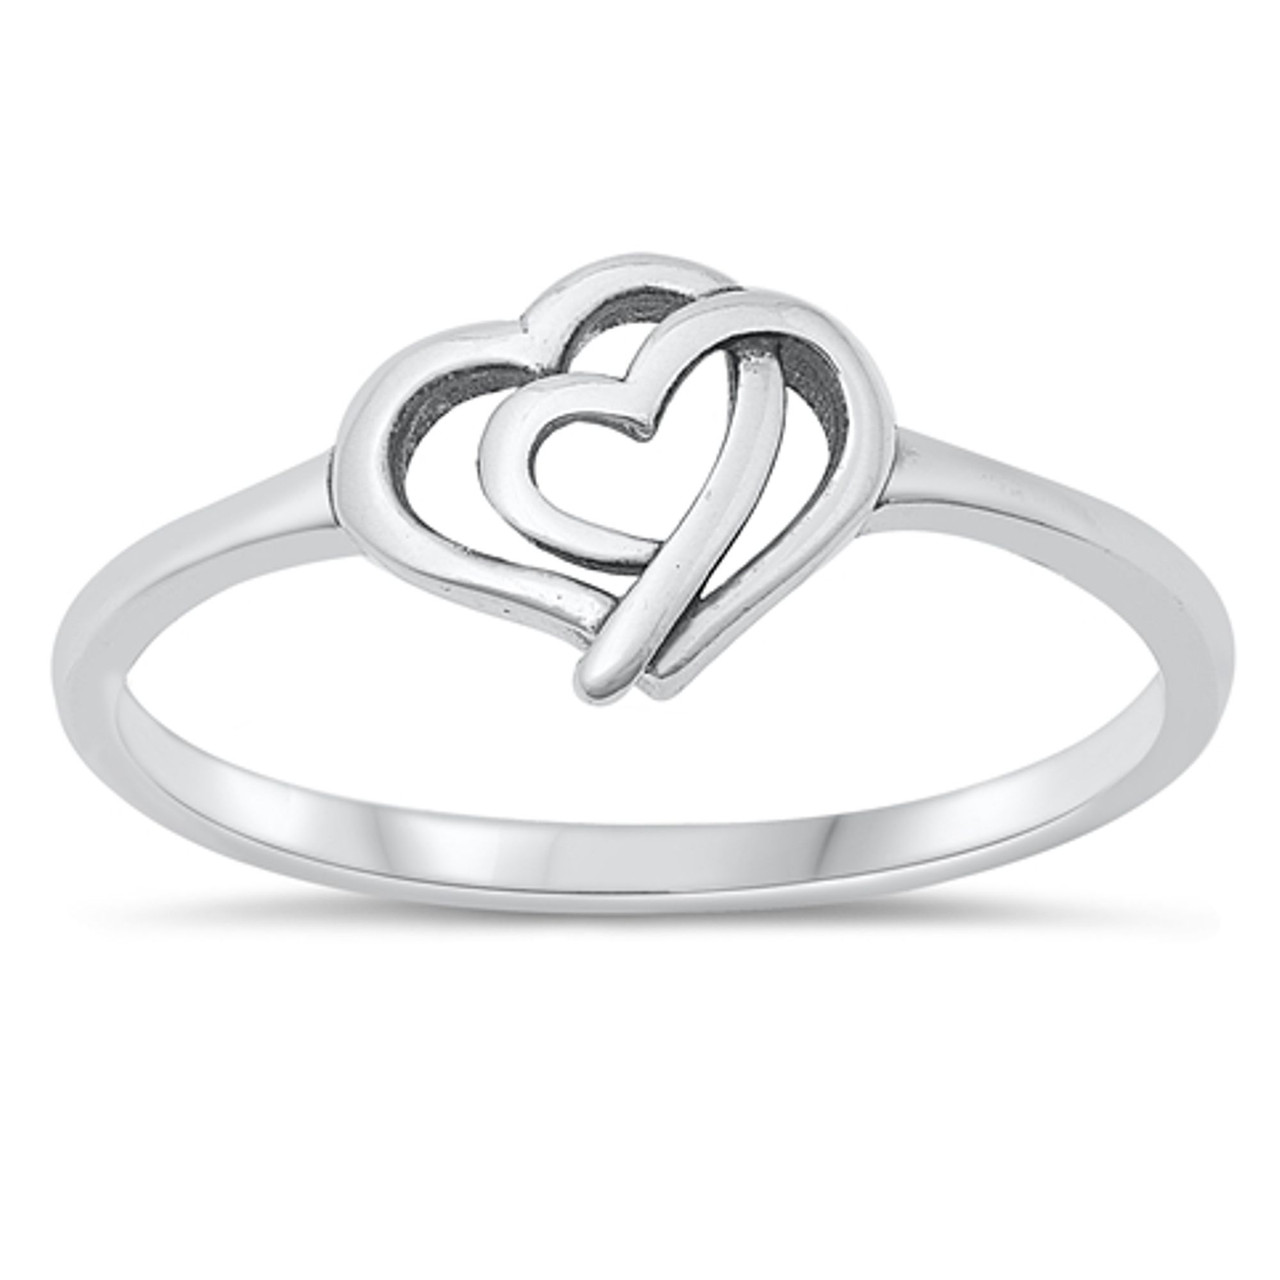 Personalized 925 Sterling Silver Double Heart Ring - ForeverGifts.com